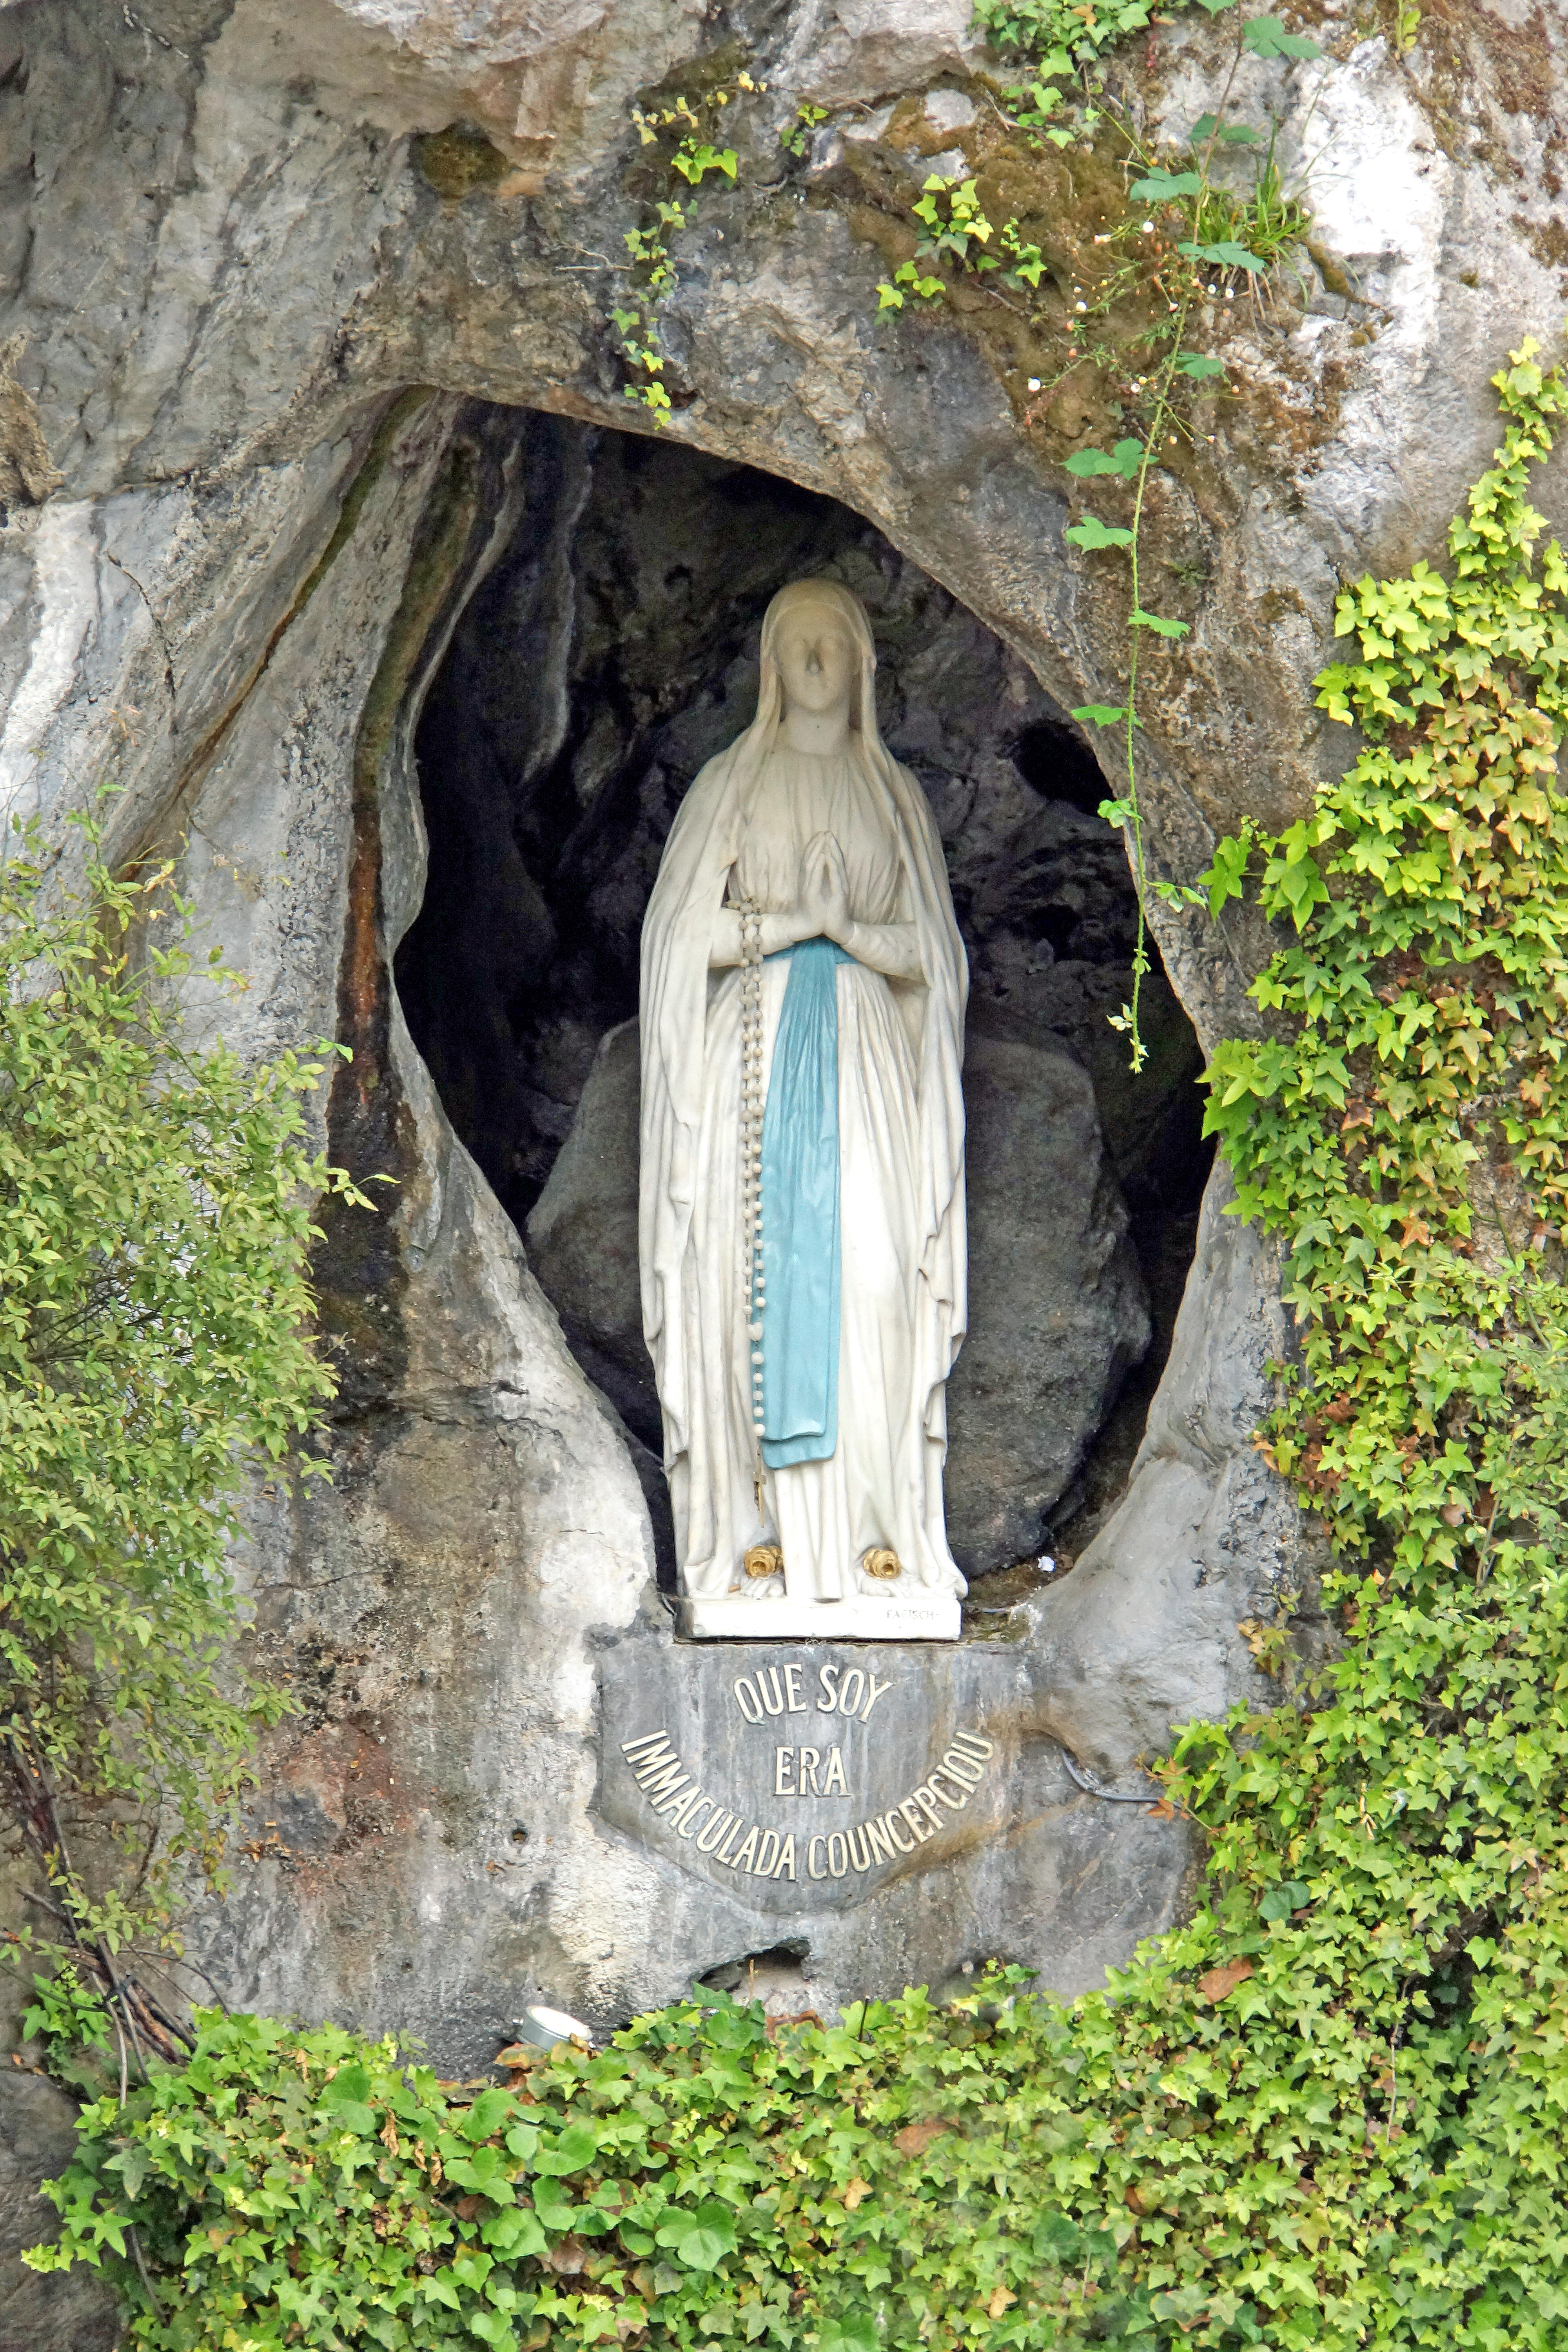 The statue within the rock cave at Massabielle in Lourdes, where Saint Bernadette Soubirous claimed to have witnessed the Blessed Virgin Mary, though however she disapproved of its artistic demeanor. Now a religious grotto. Photo taken on June 28, 2014.